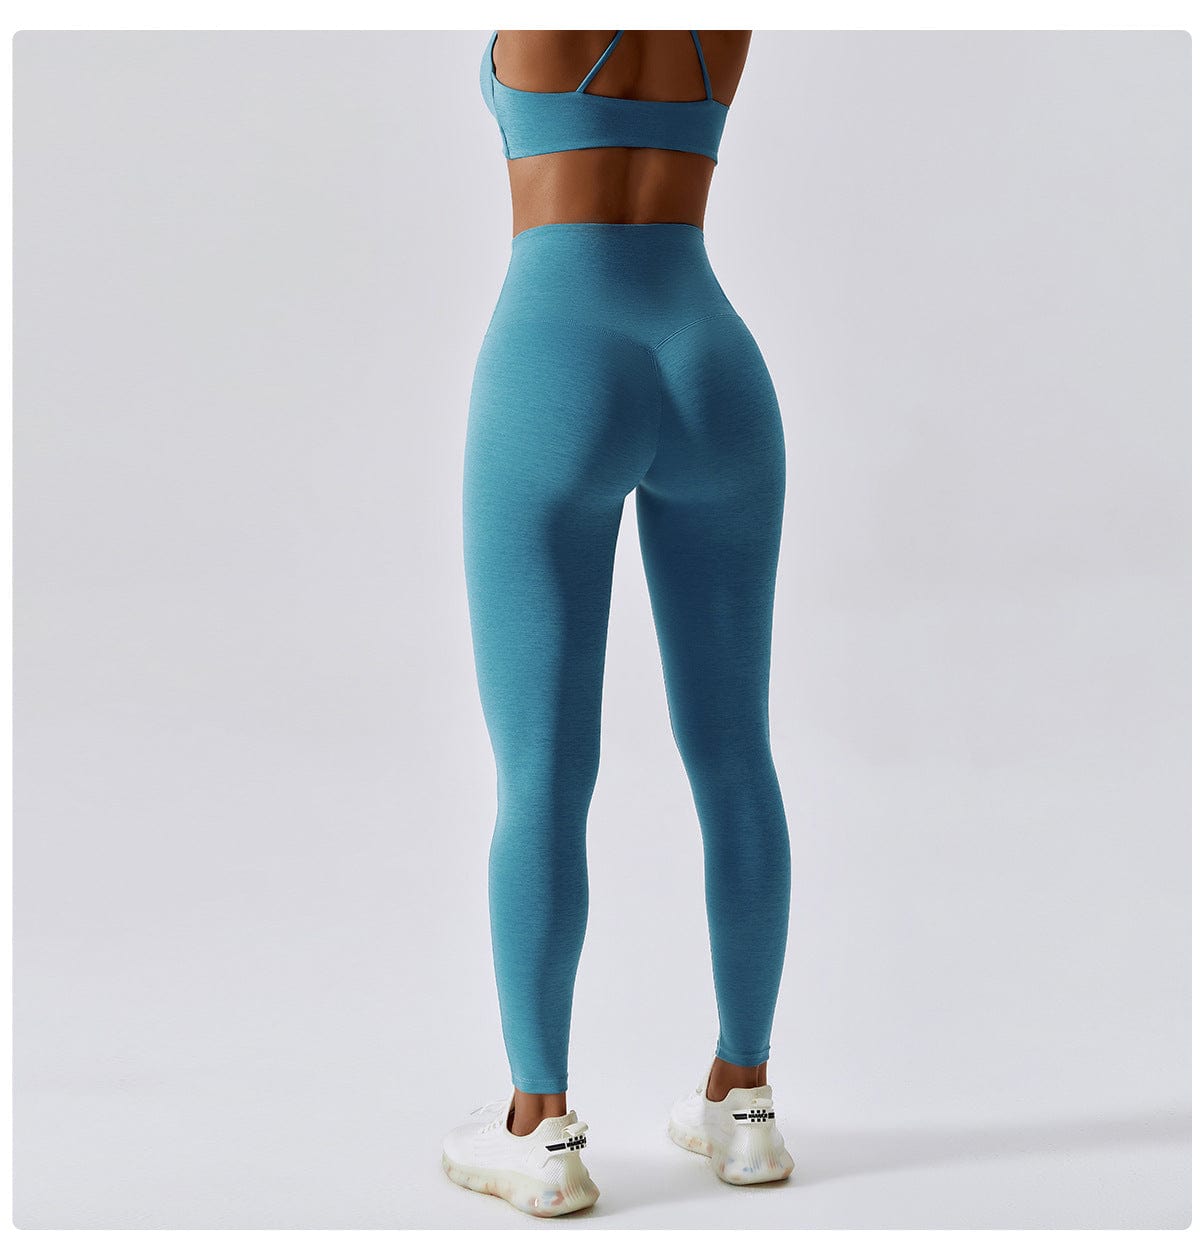 Quick Dry Spandex Leggings Scrunch Butt Workout Tight Yoga Pants